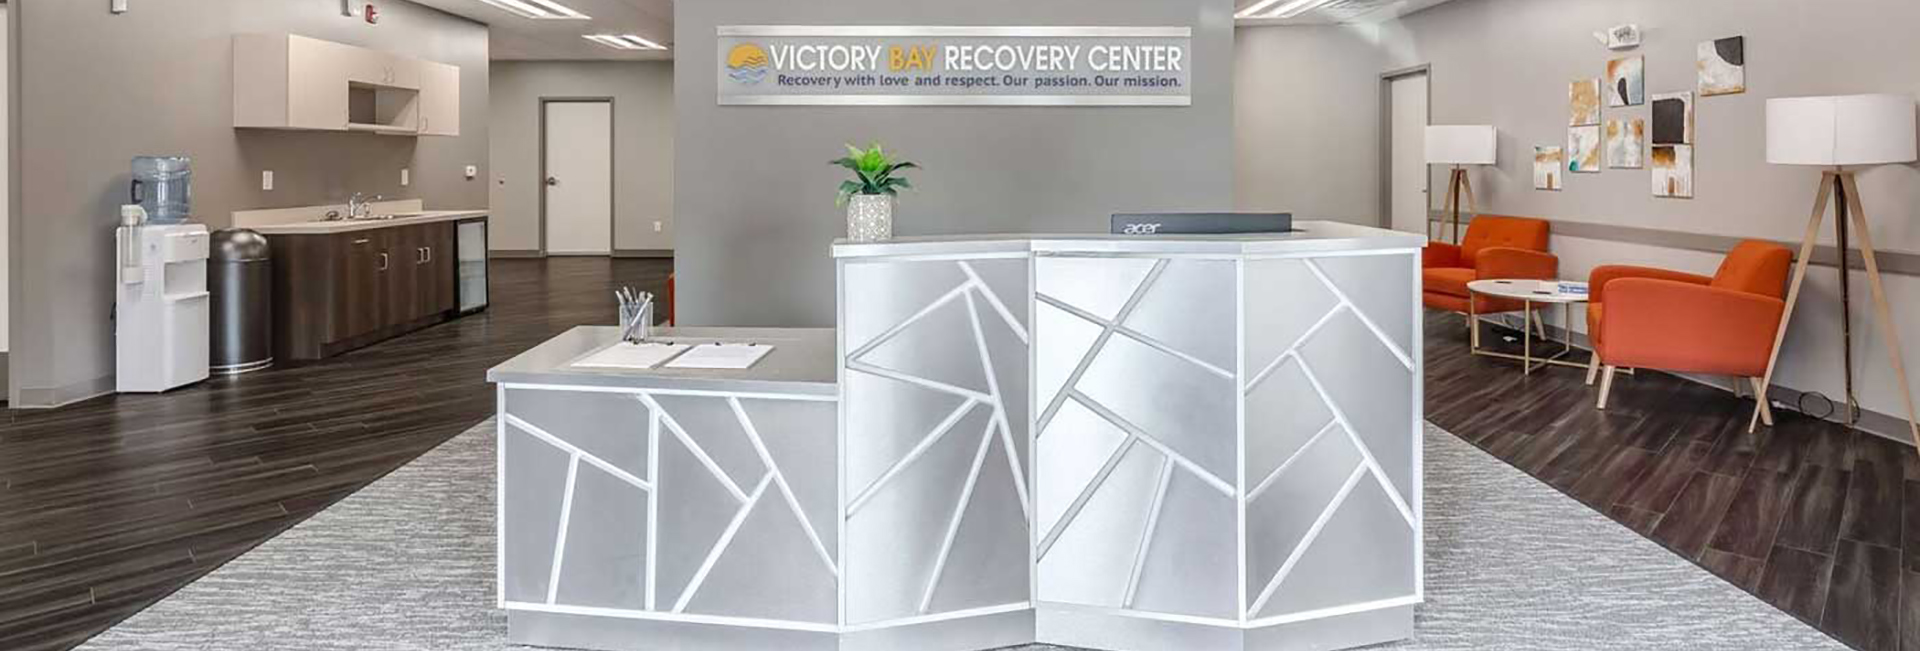 Victory Bay Recovery Centers